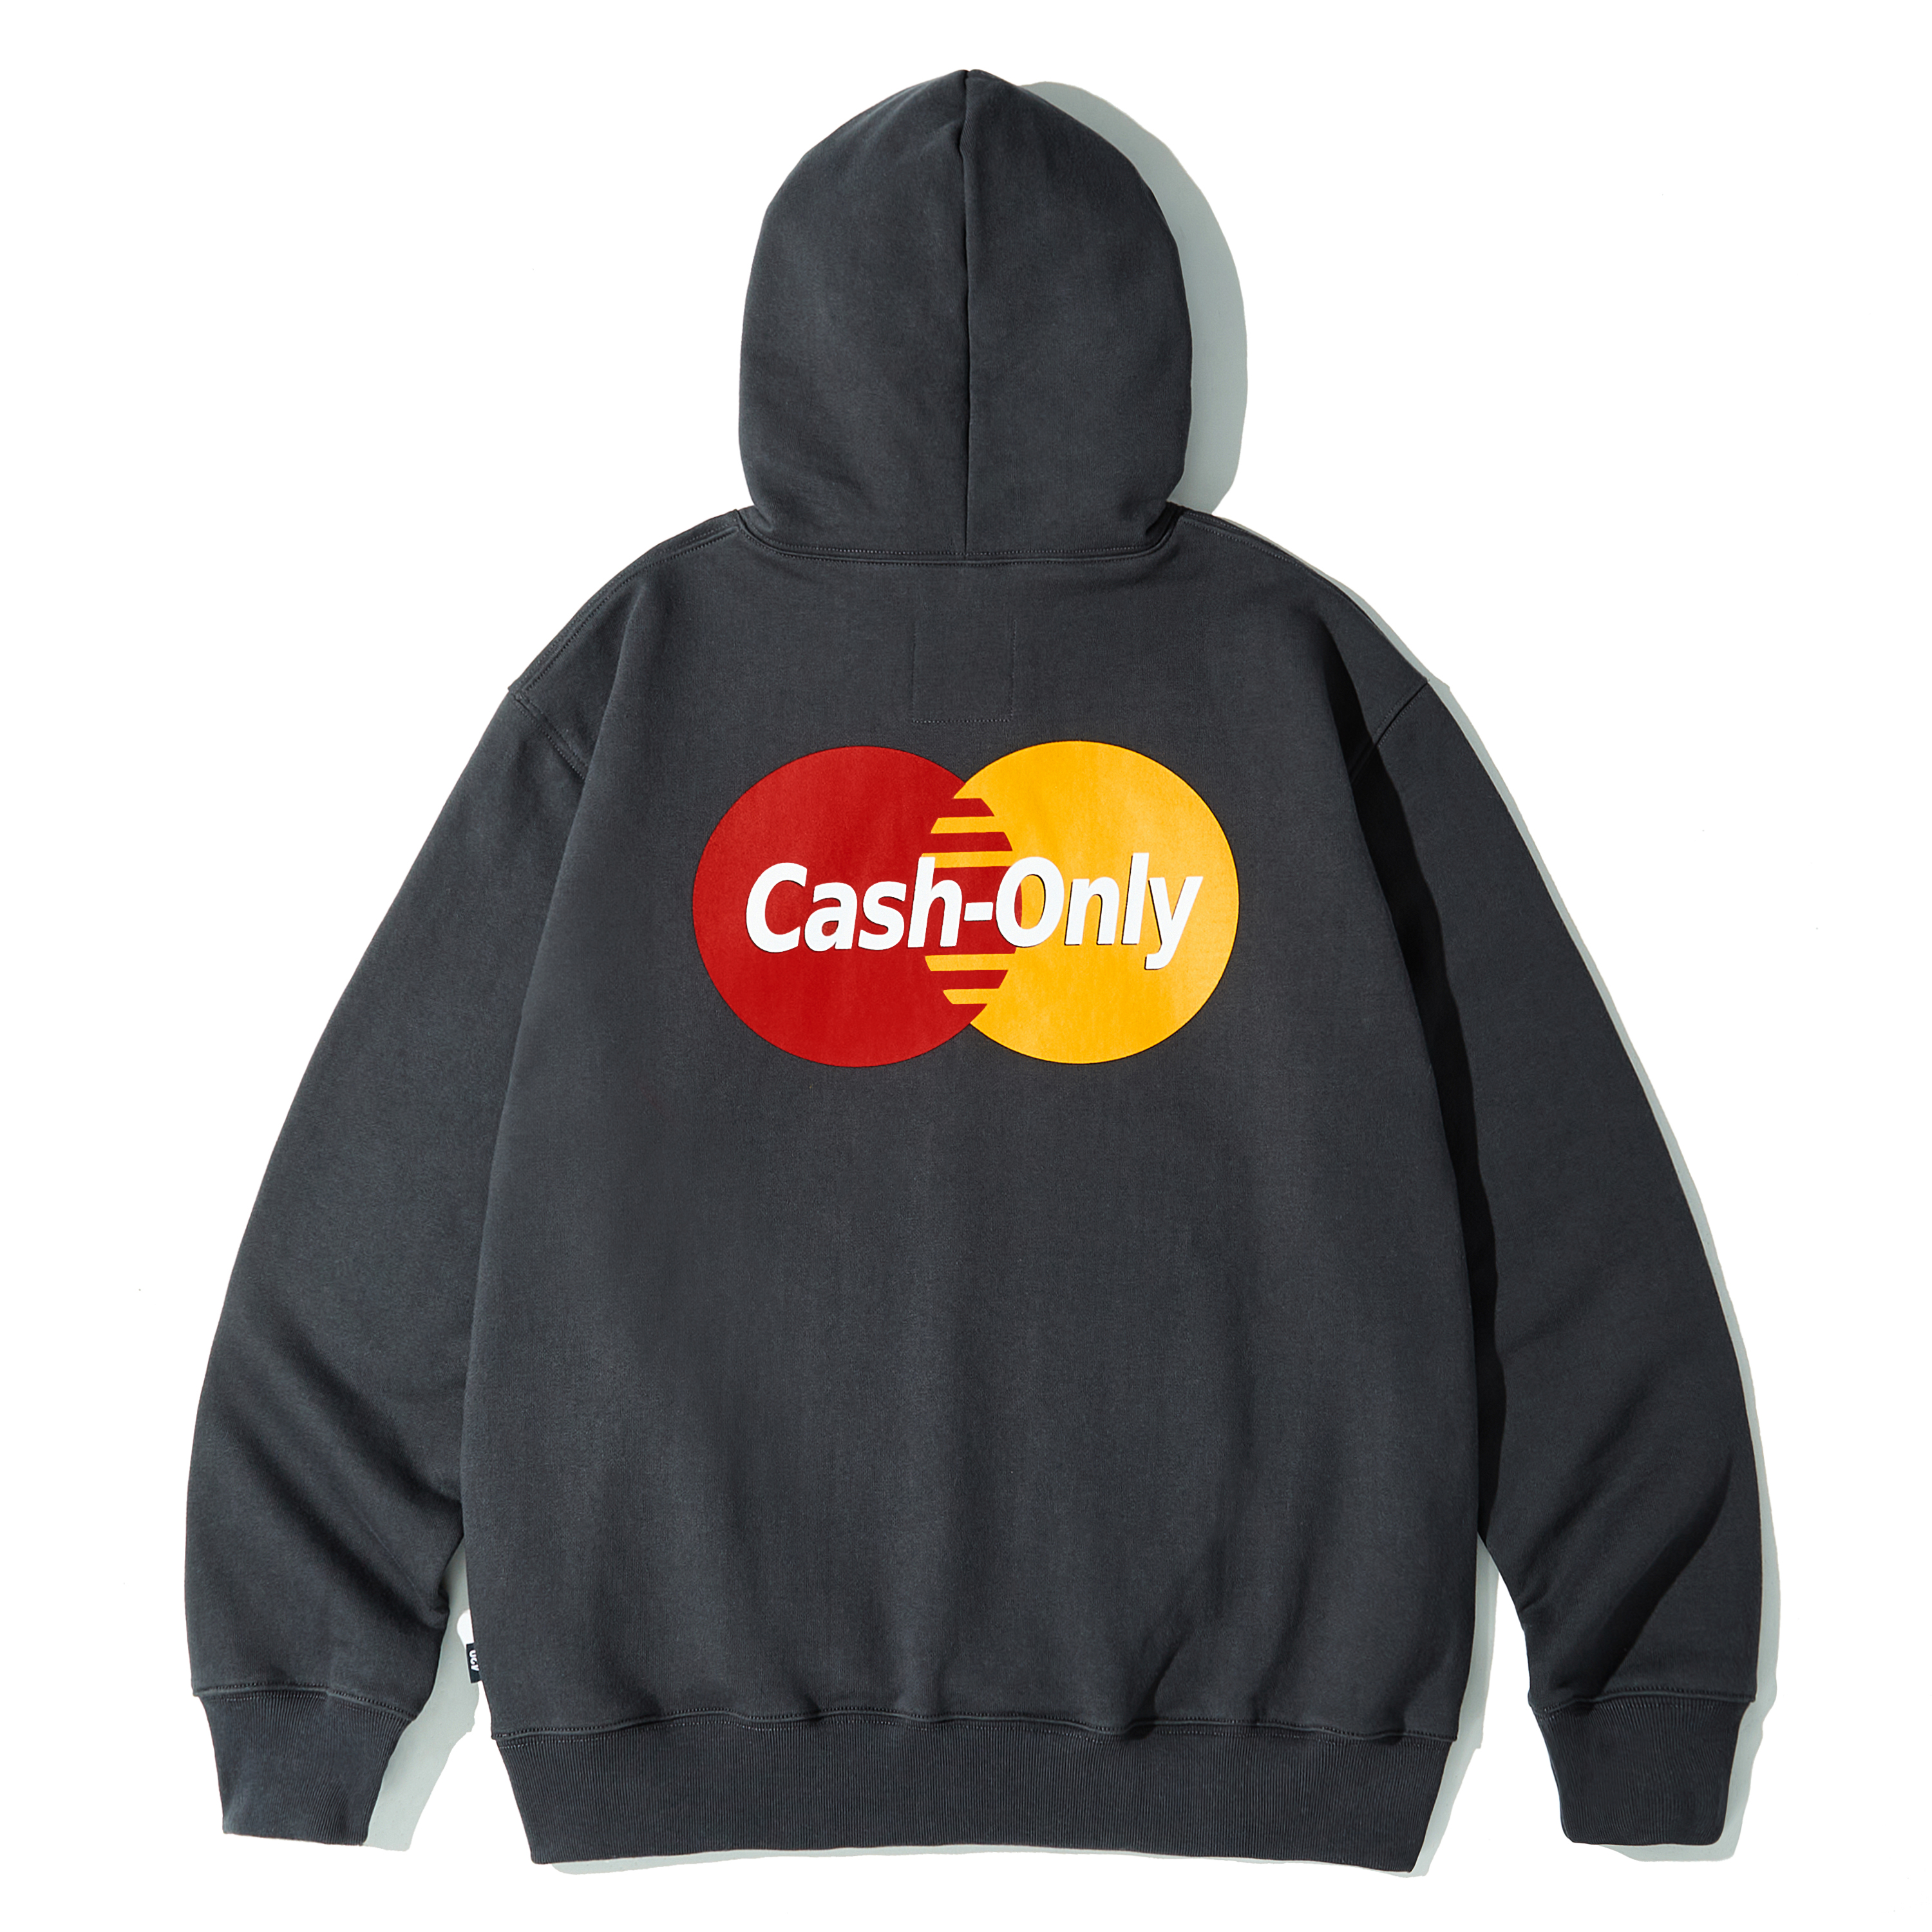 CASH-ONLY HOODIE